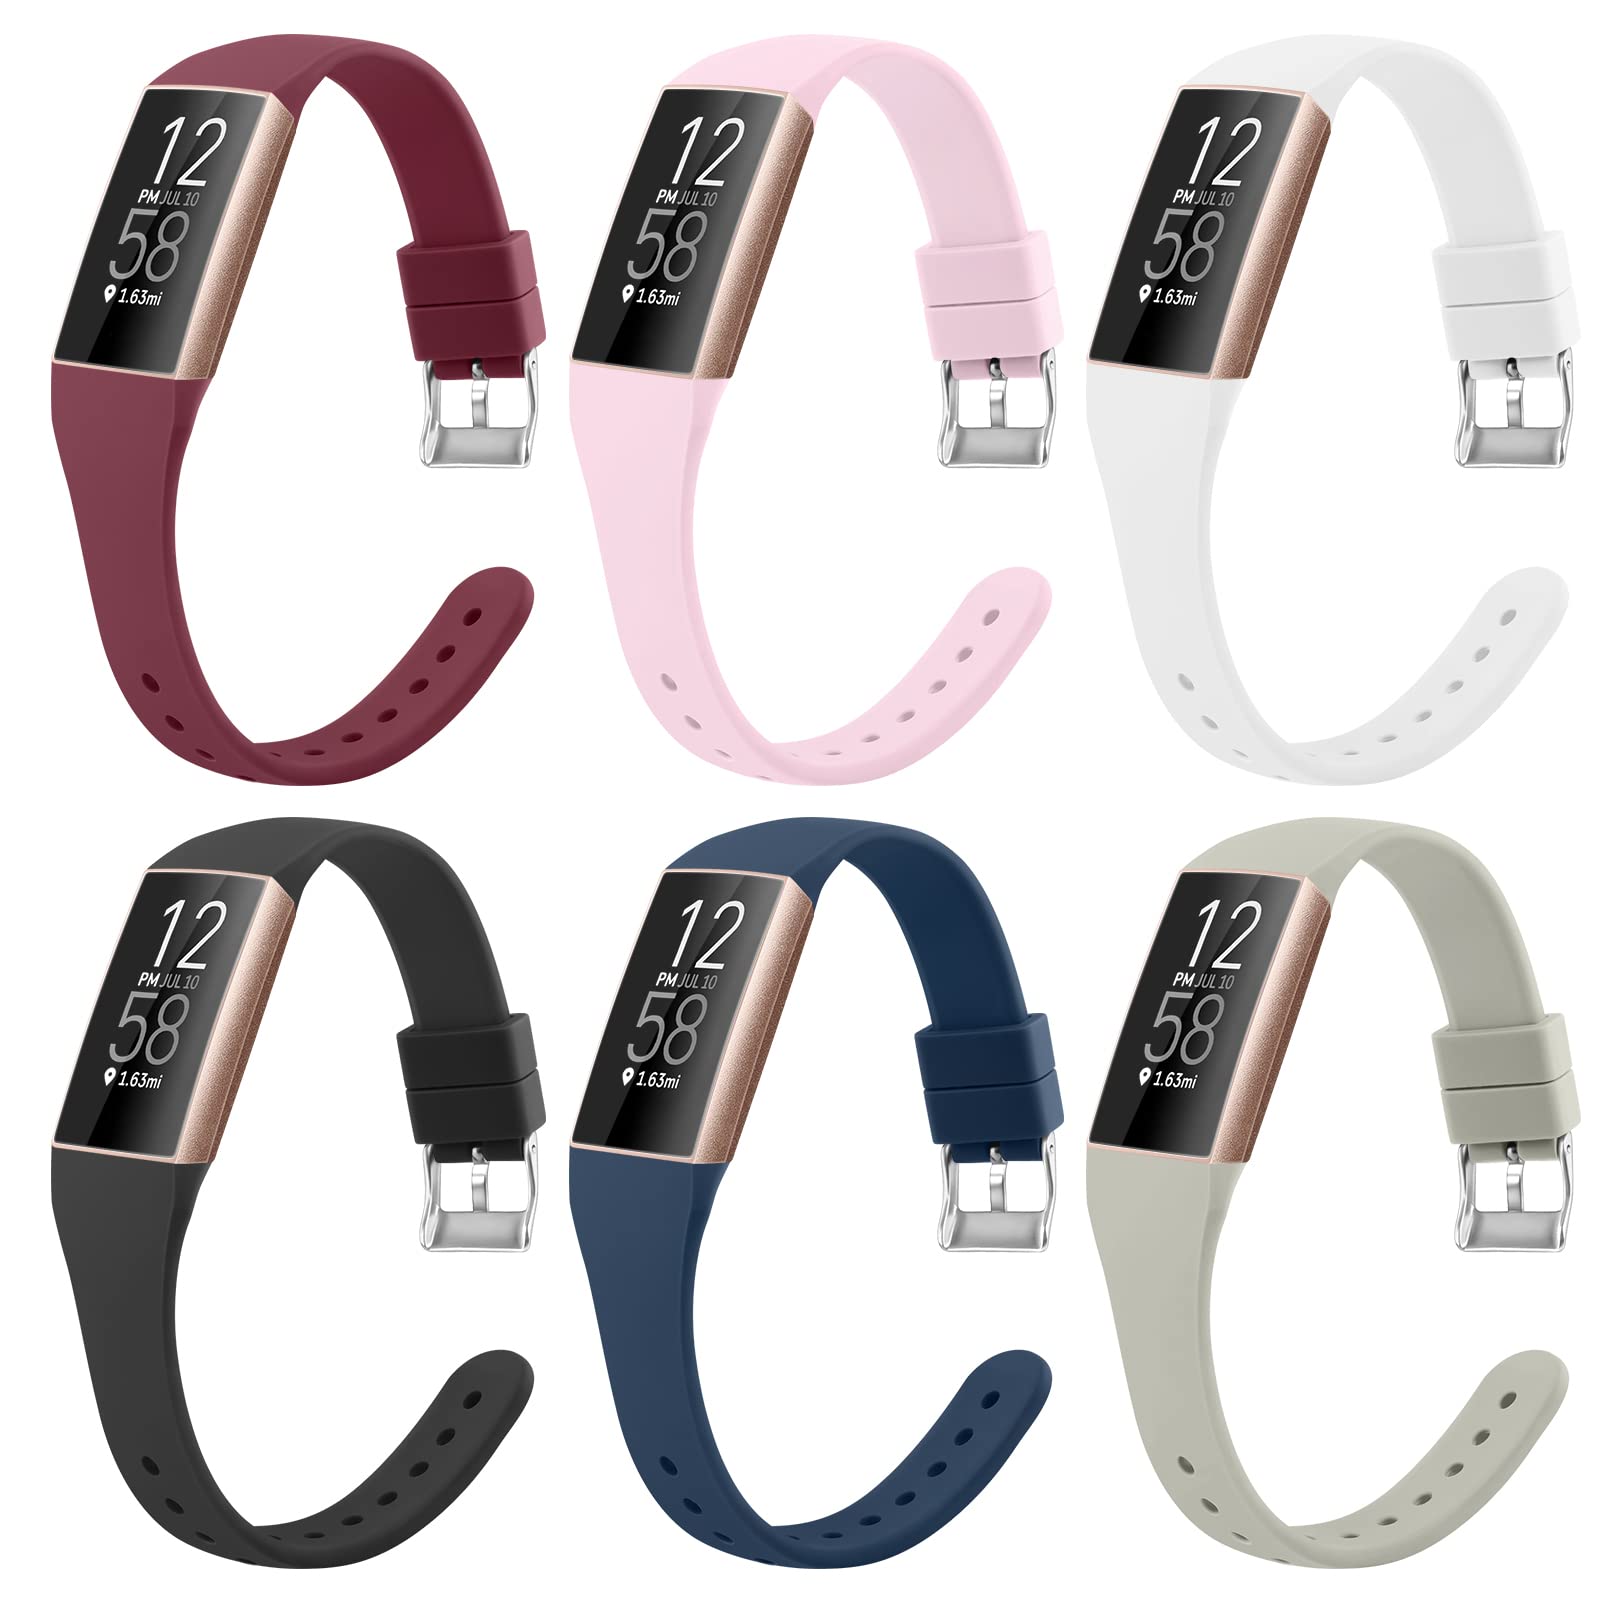 6 Pack Slim Soft Silicone Wristbands Compatible Fitbit Charge 4 Bands, Replacement Straps for